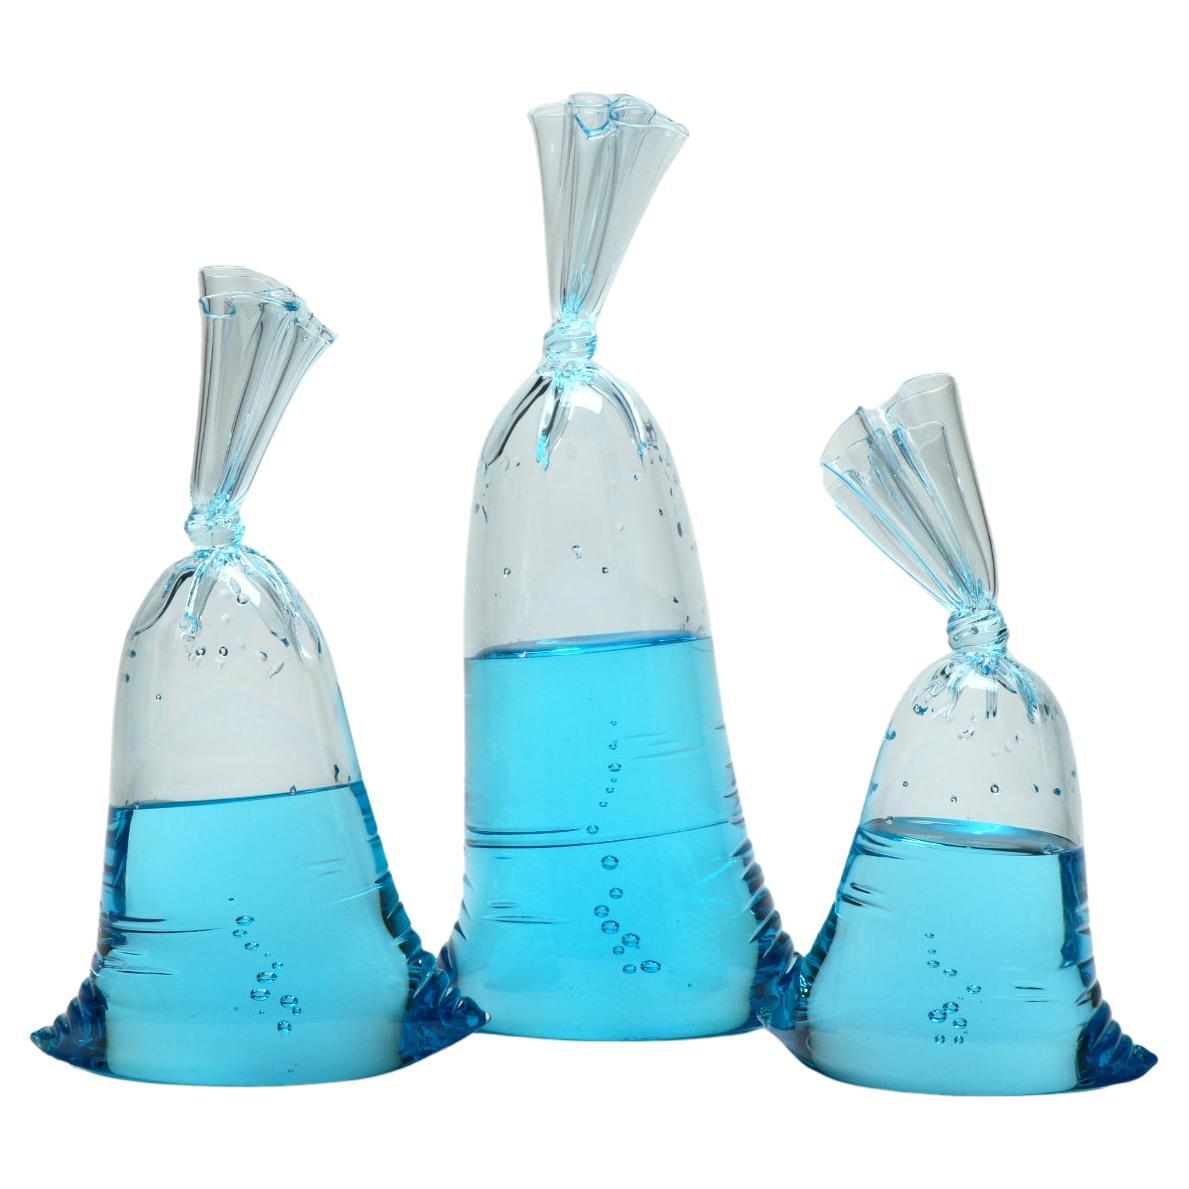 Hyperreal blue glass water bag trio sculpture installation